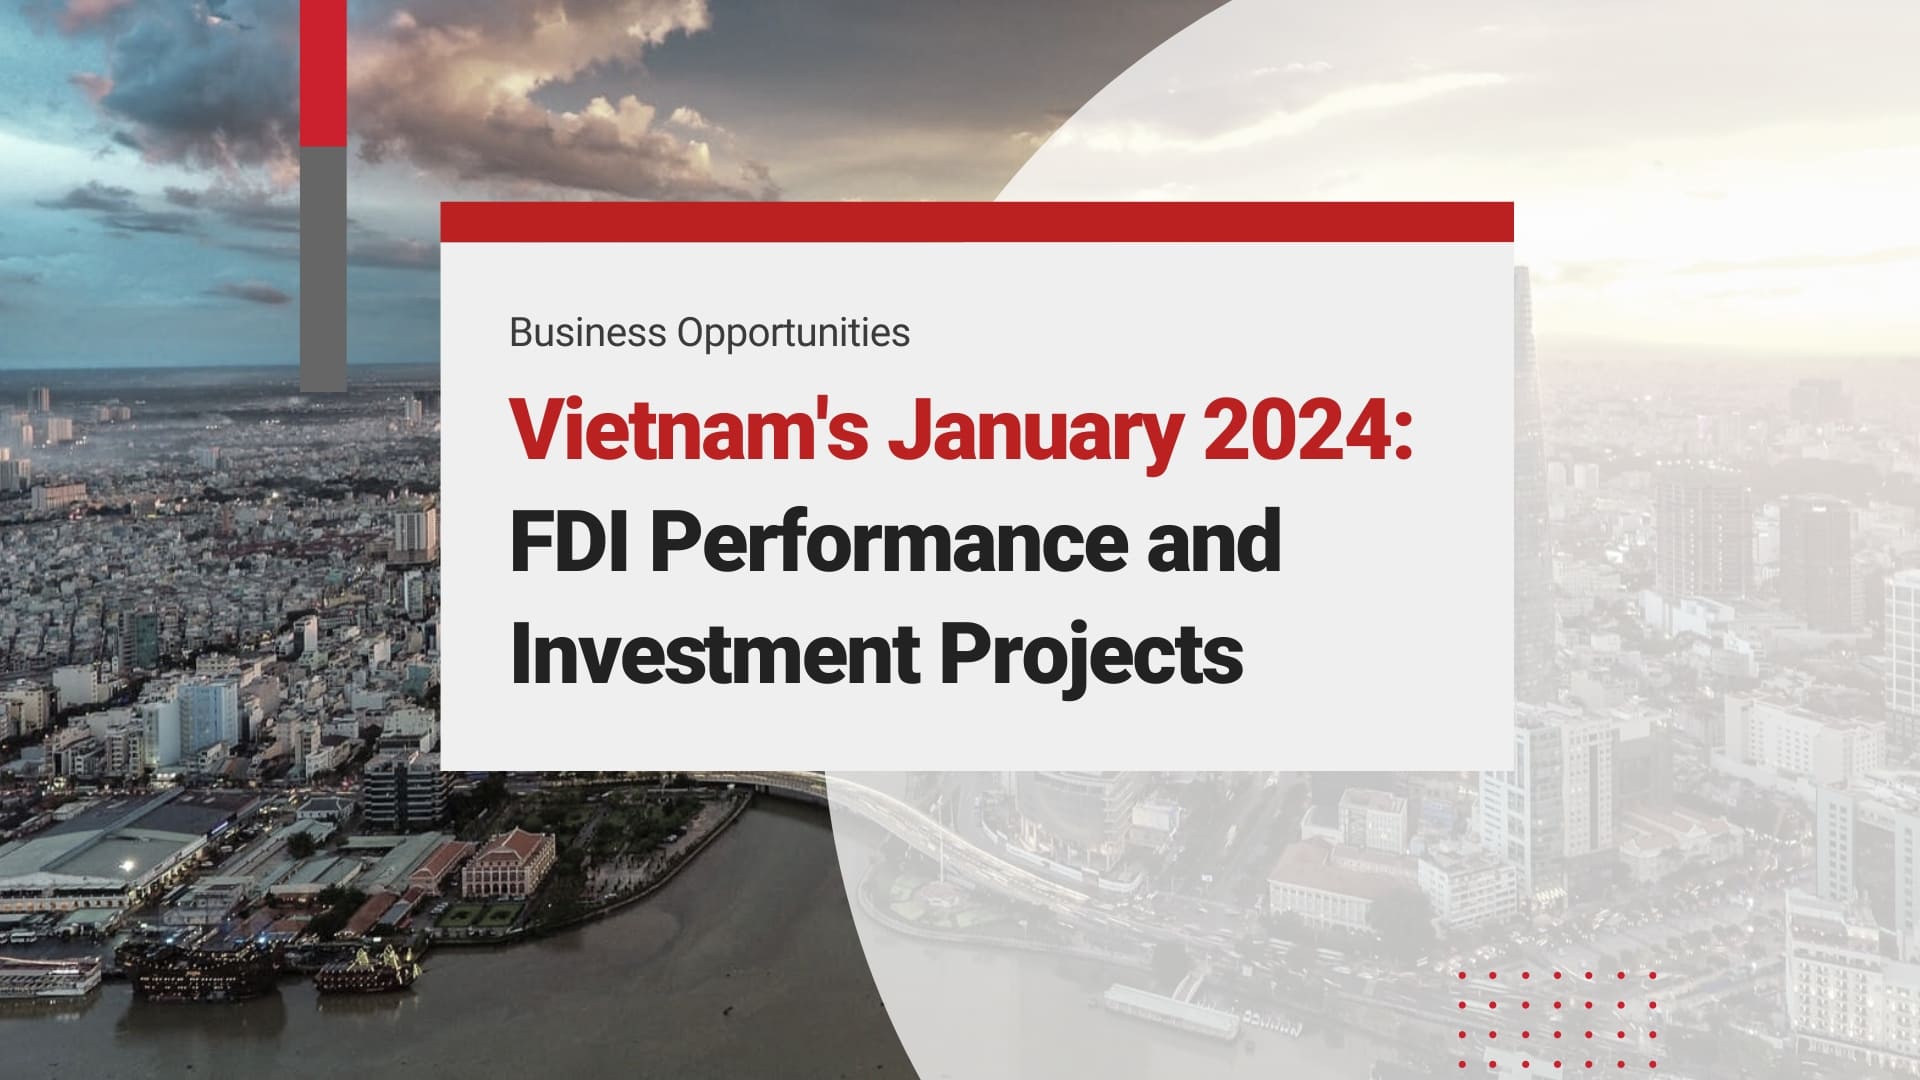 Vietnam's January 2024 Investment Highlights: FDI Performance and Key Foreign Business Projects